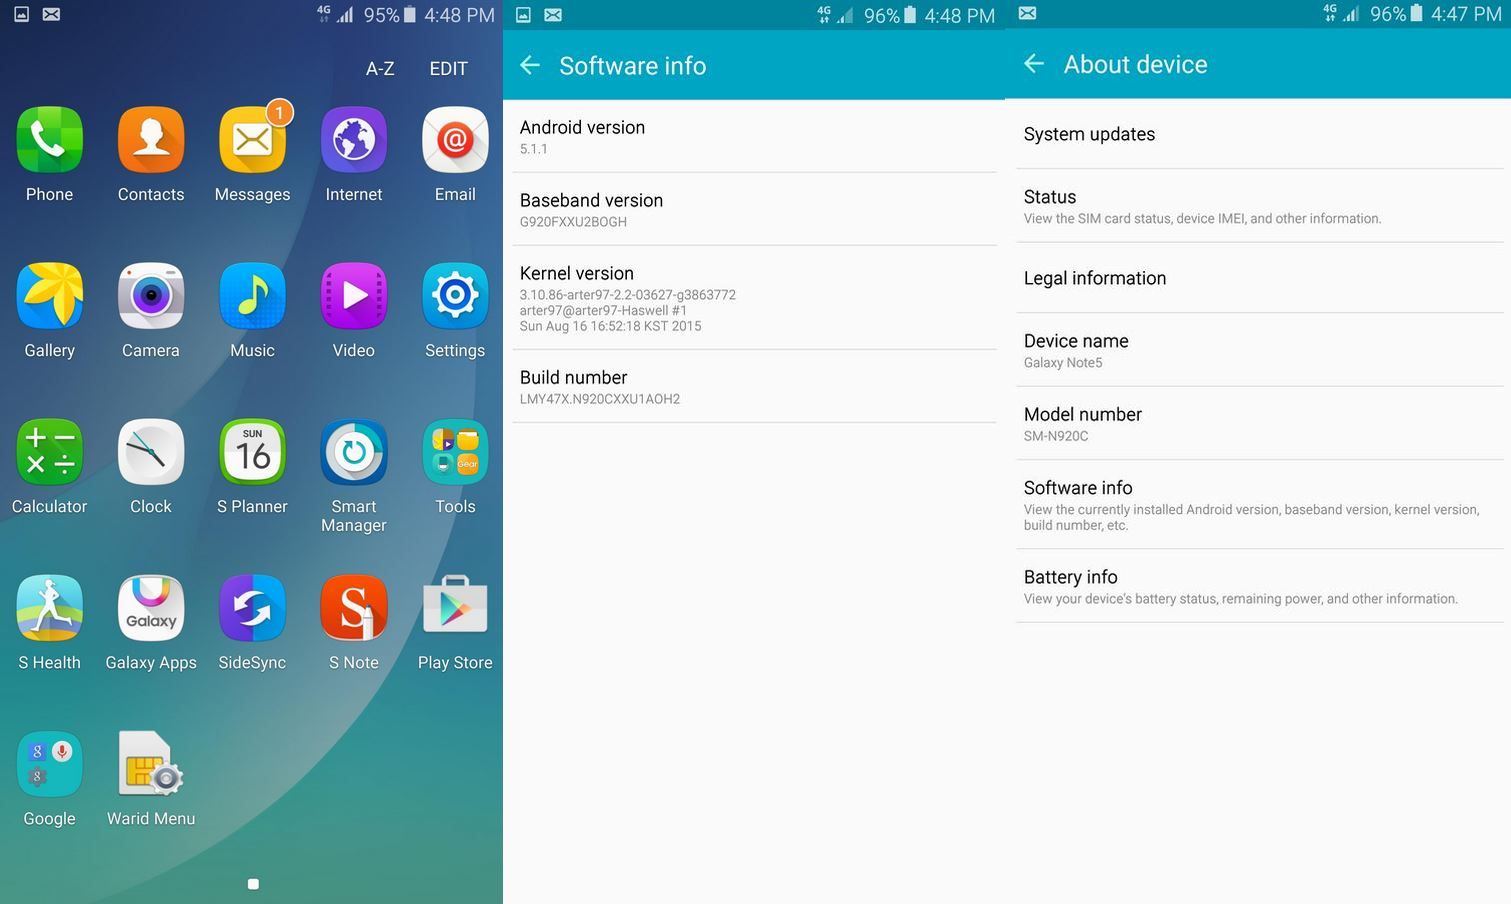 Gt launcher 5.2 0 что это. Email номер галакси 6. 6b андроид. Galaxy Note 5 FF settings. What is the latest Android Version.